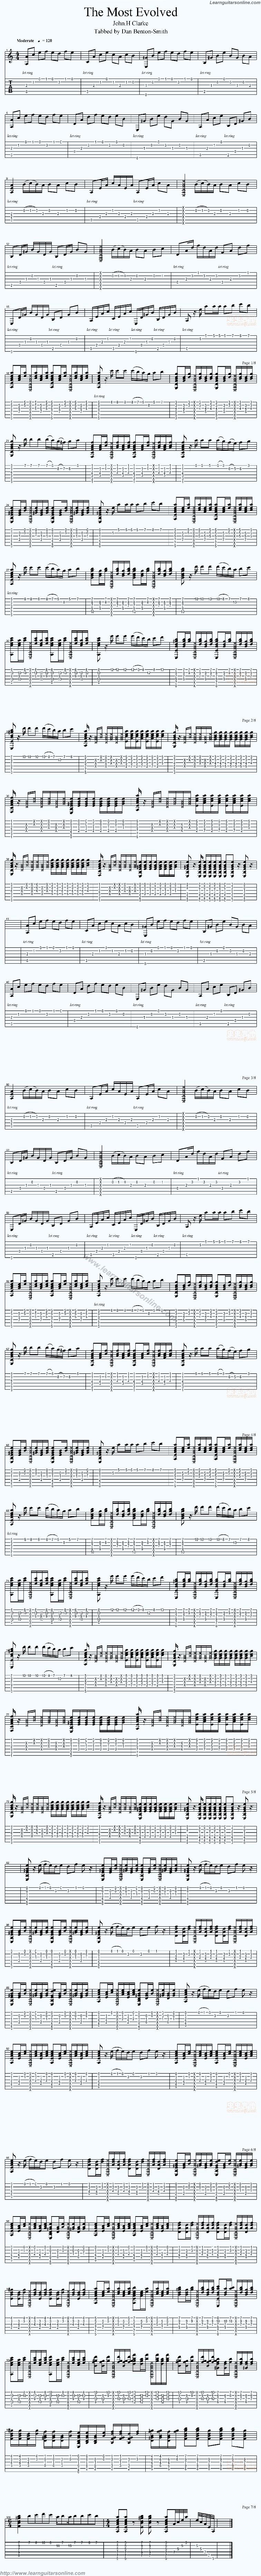 The Most Evolved by John H Clarke Guitar Sheet Music Free